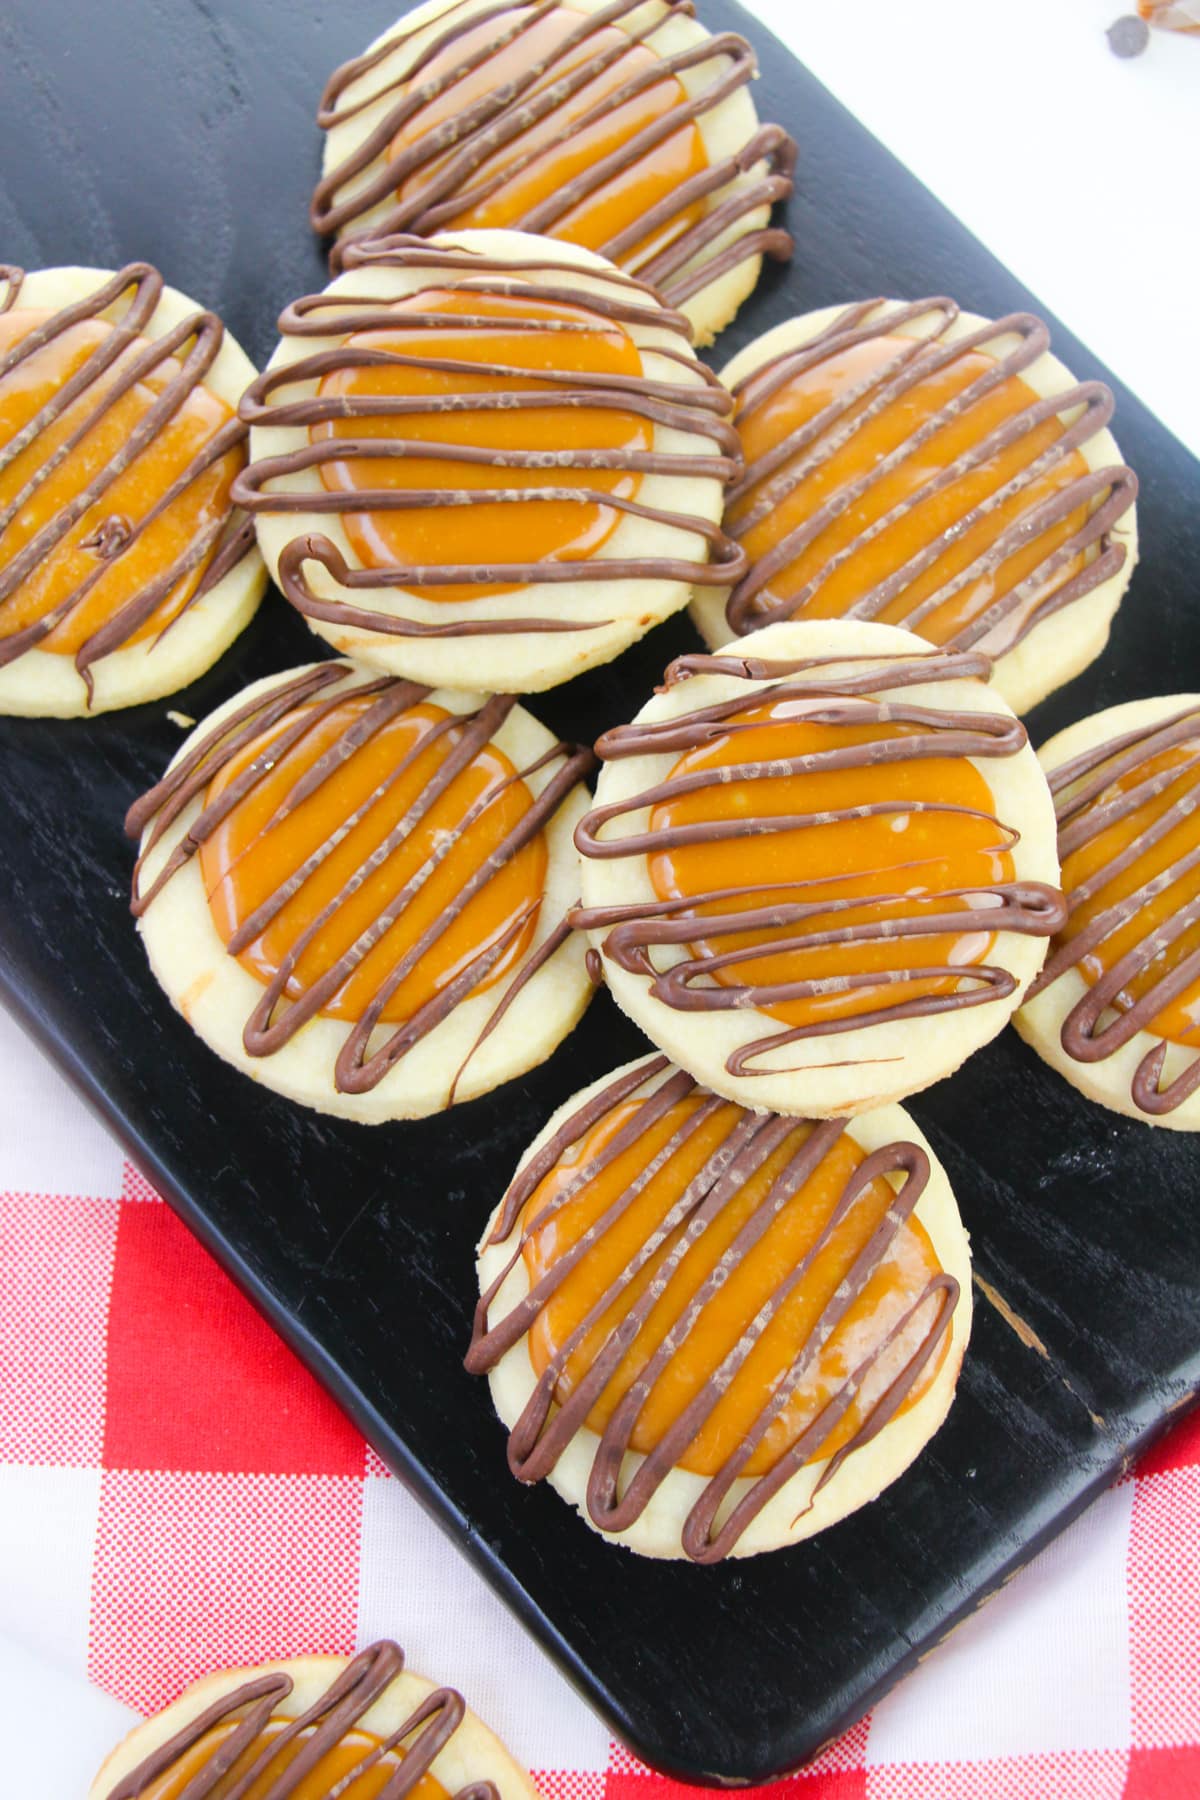 Piece of Chocolate Caramel Shortbread Cookies on a black tray